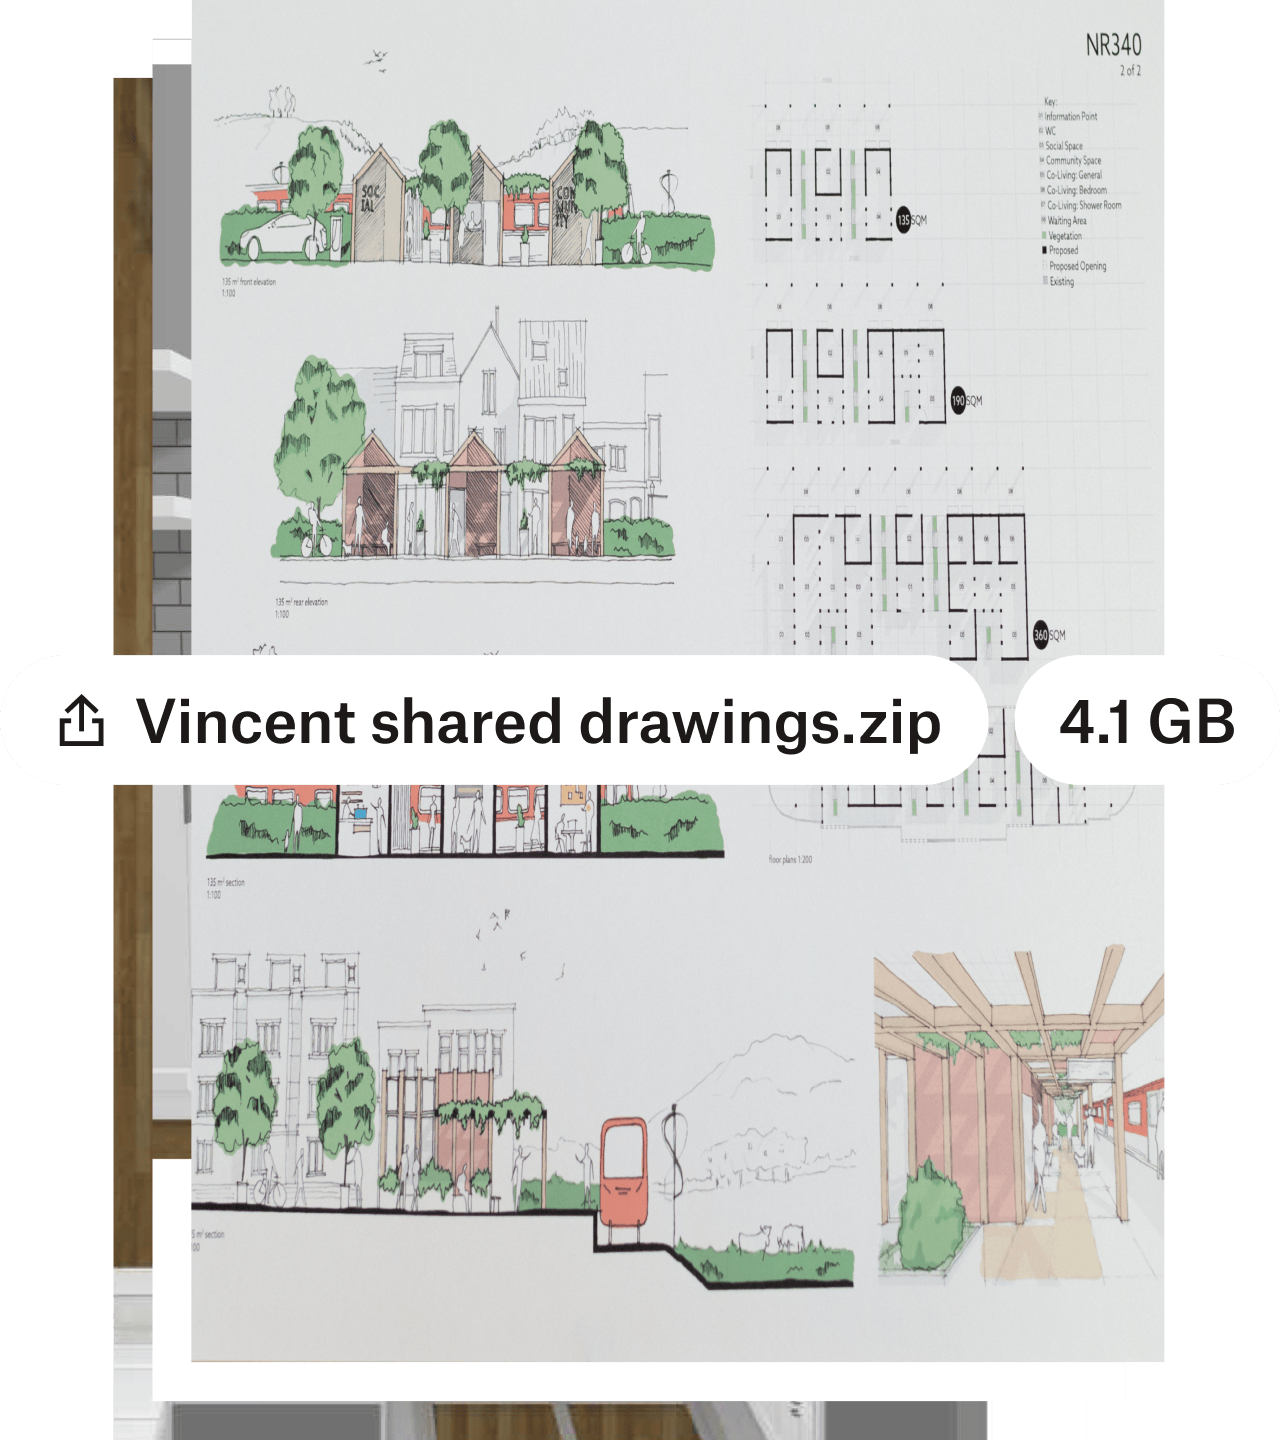 A user sharing a large zip file of drawings with Dropbox